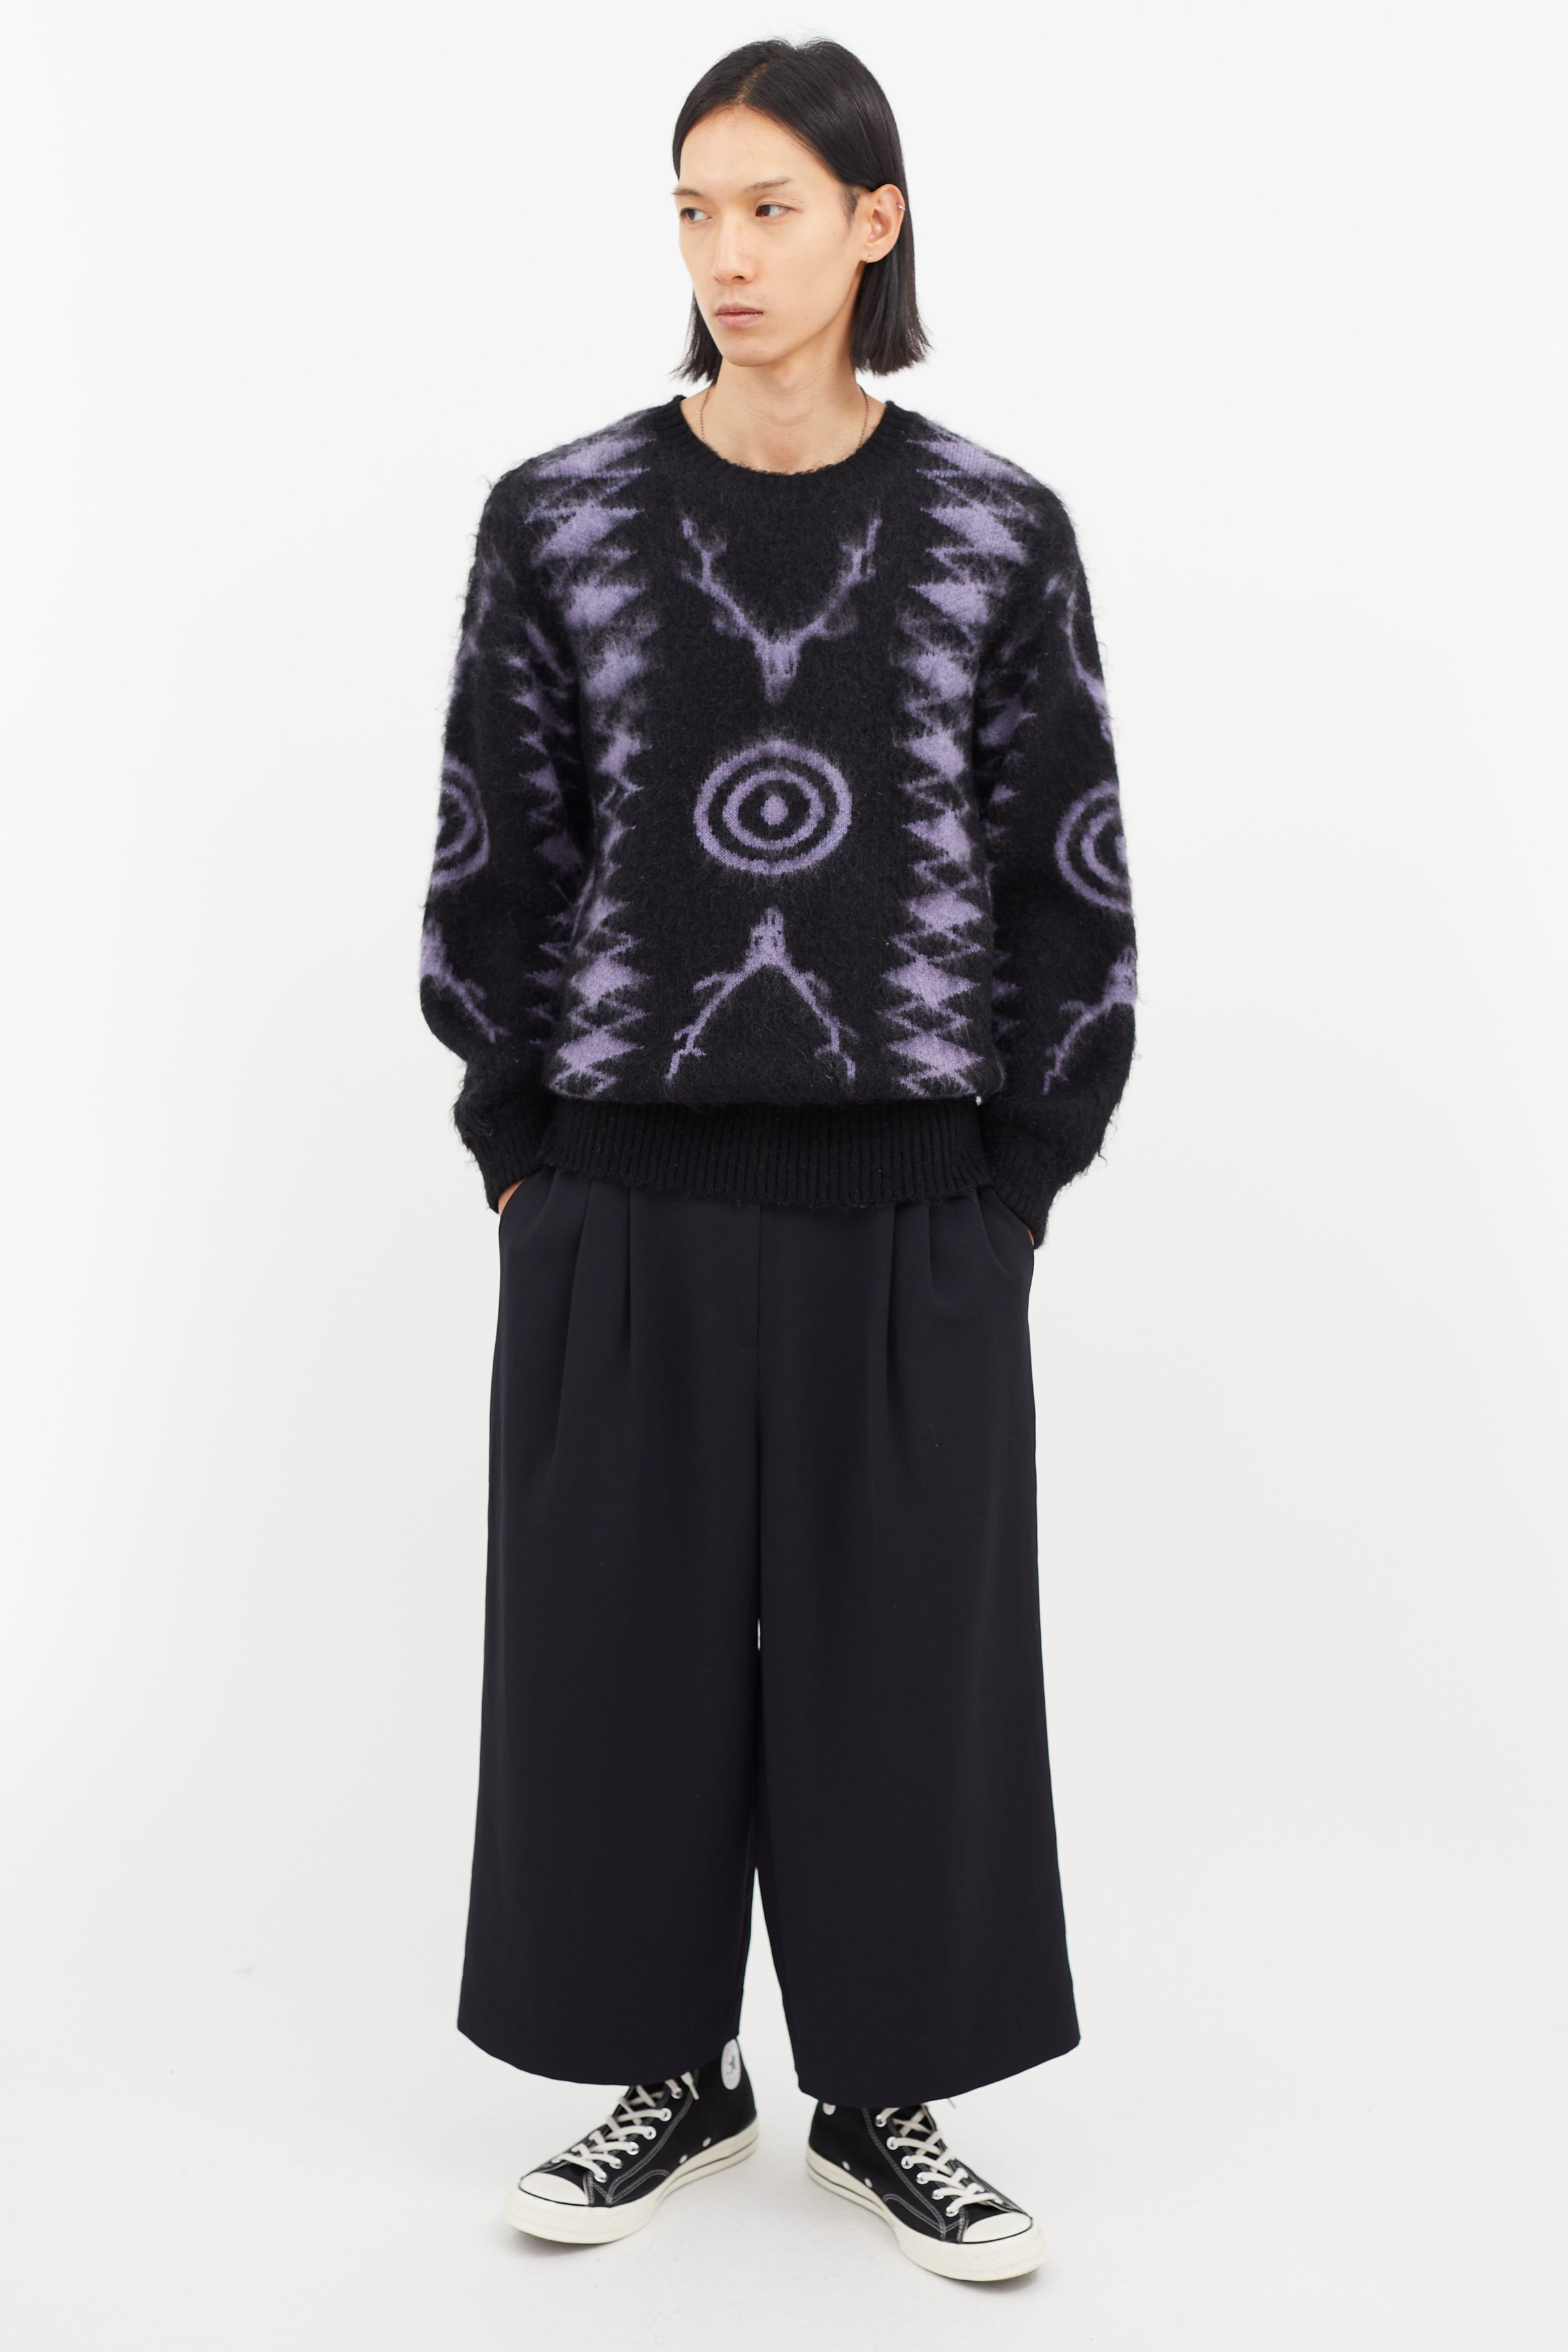 South2 West8 // Black & Purple Mohair Knit Sweater – VSP Consignment